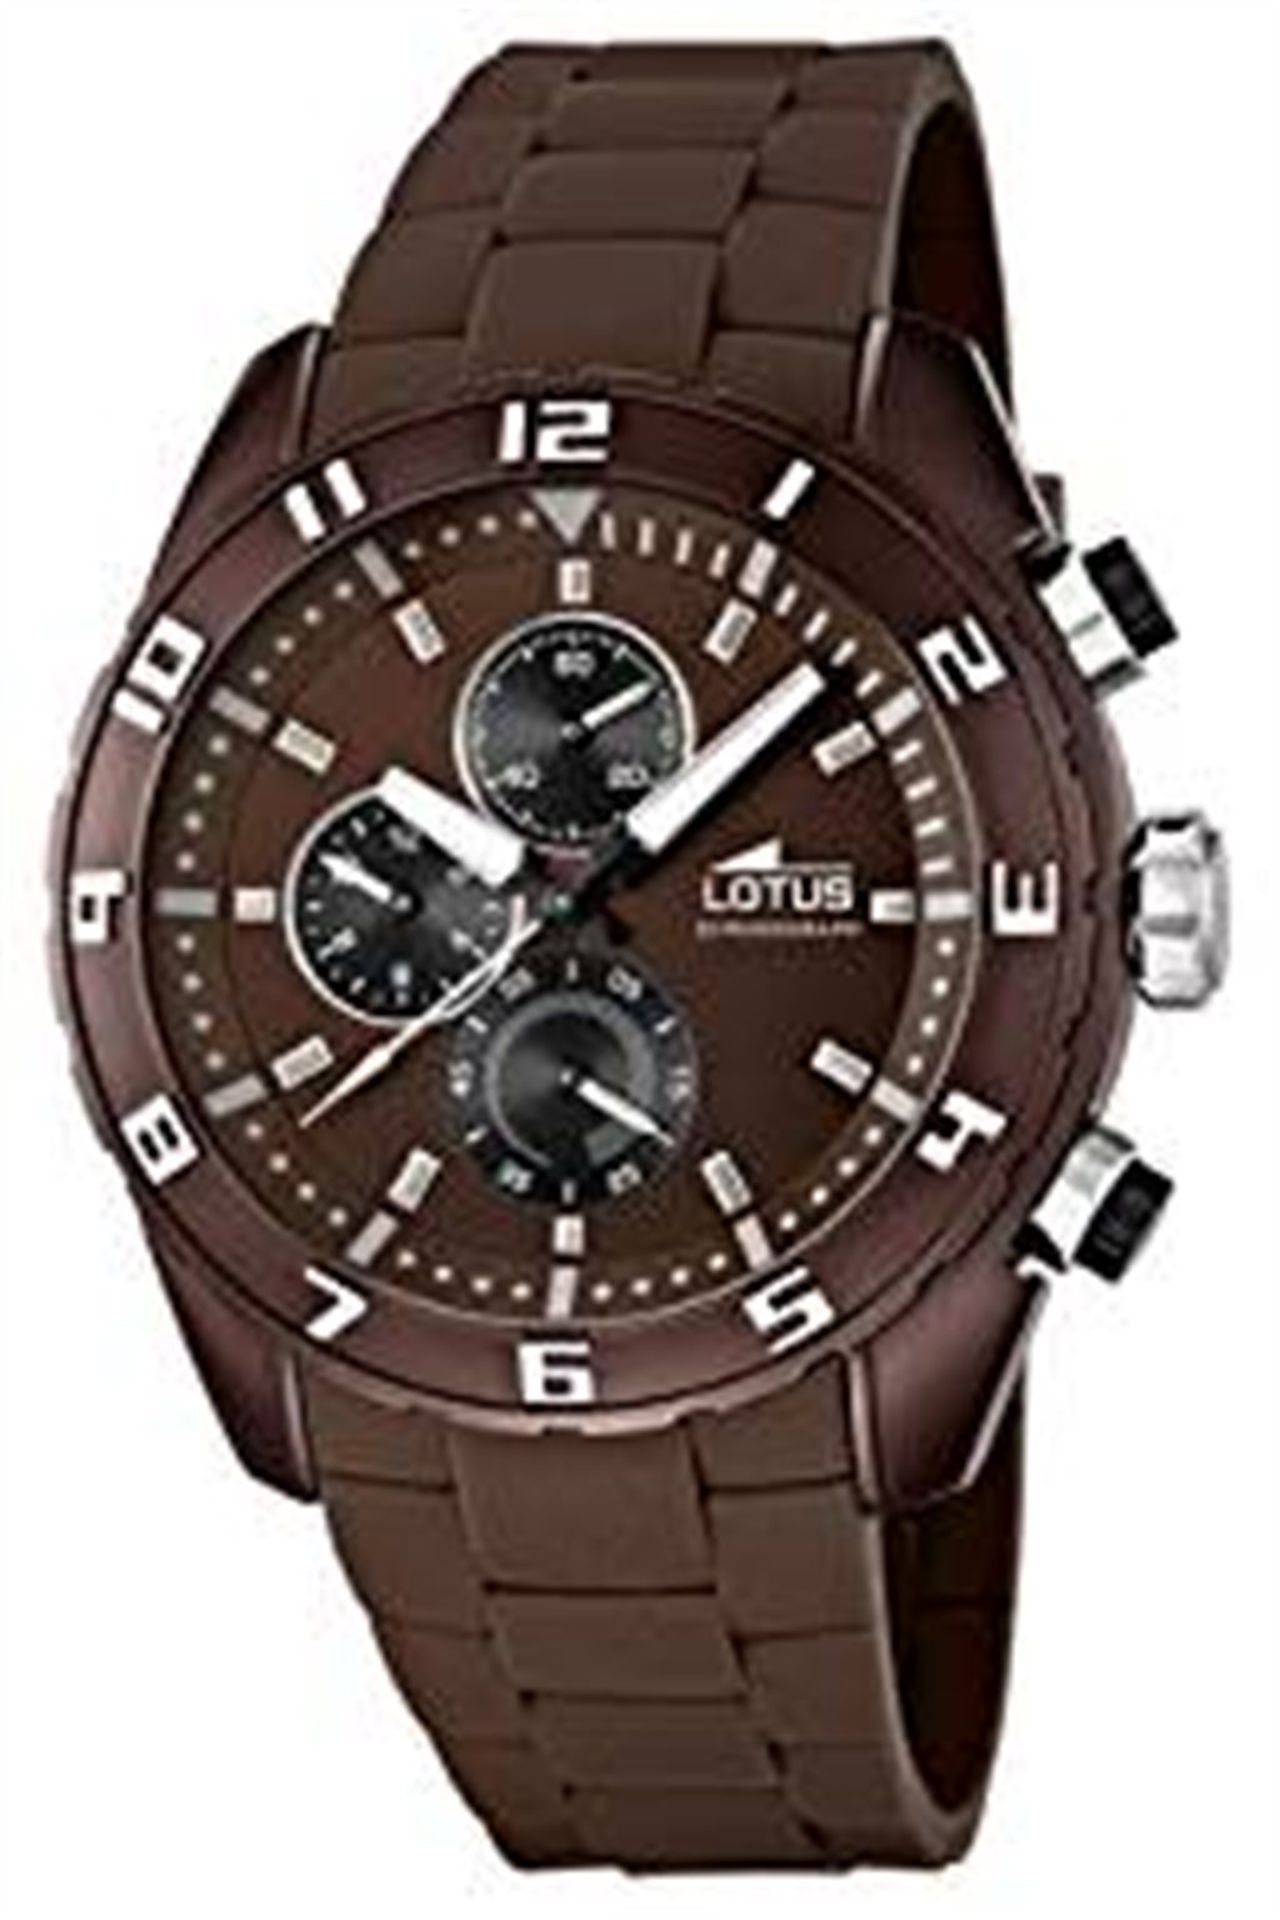 Box of 19 Discounted Watches from Lotus and more! Great Resell Potential! Details Inside - Image 14 of 19